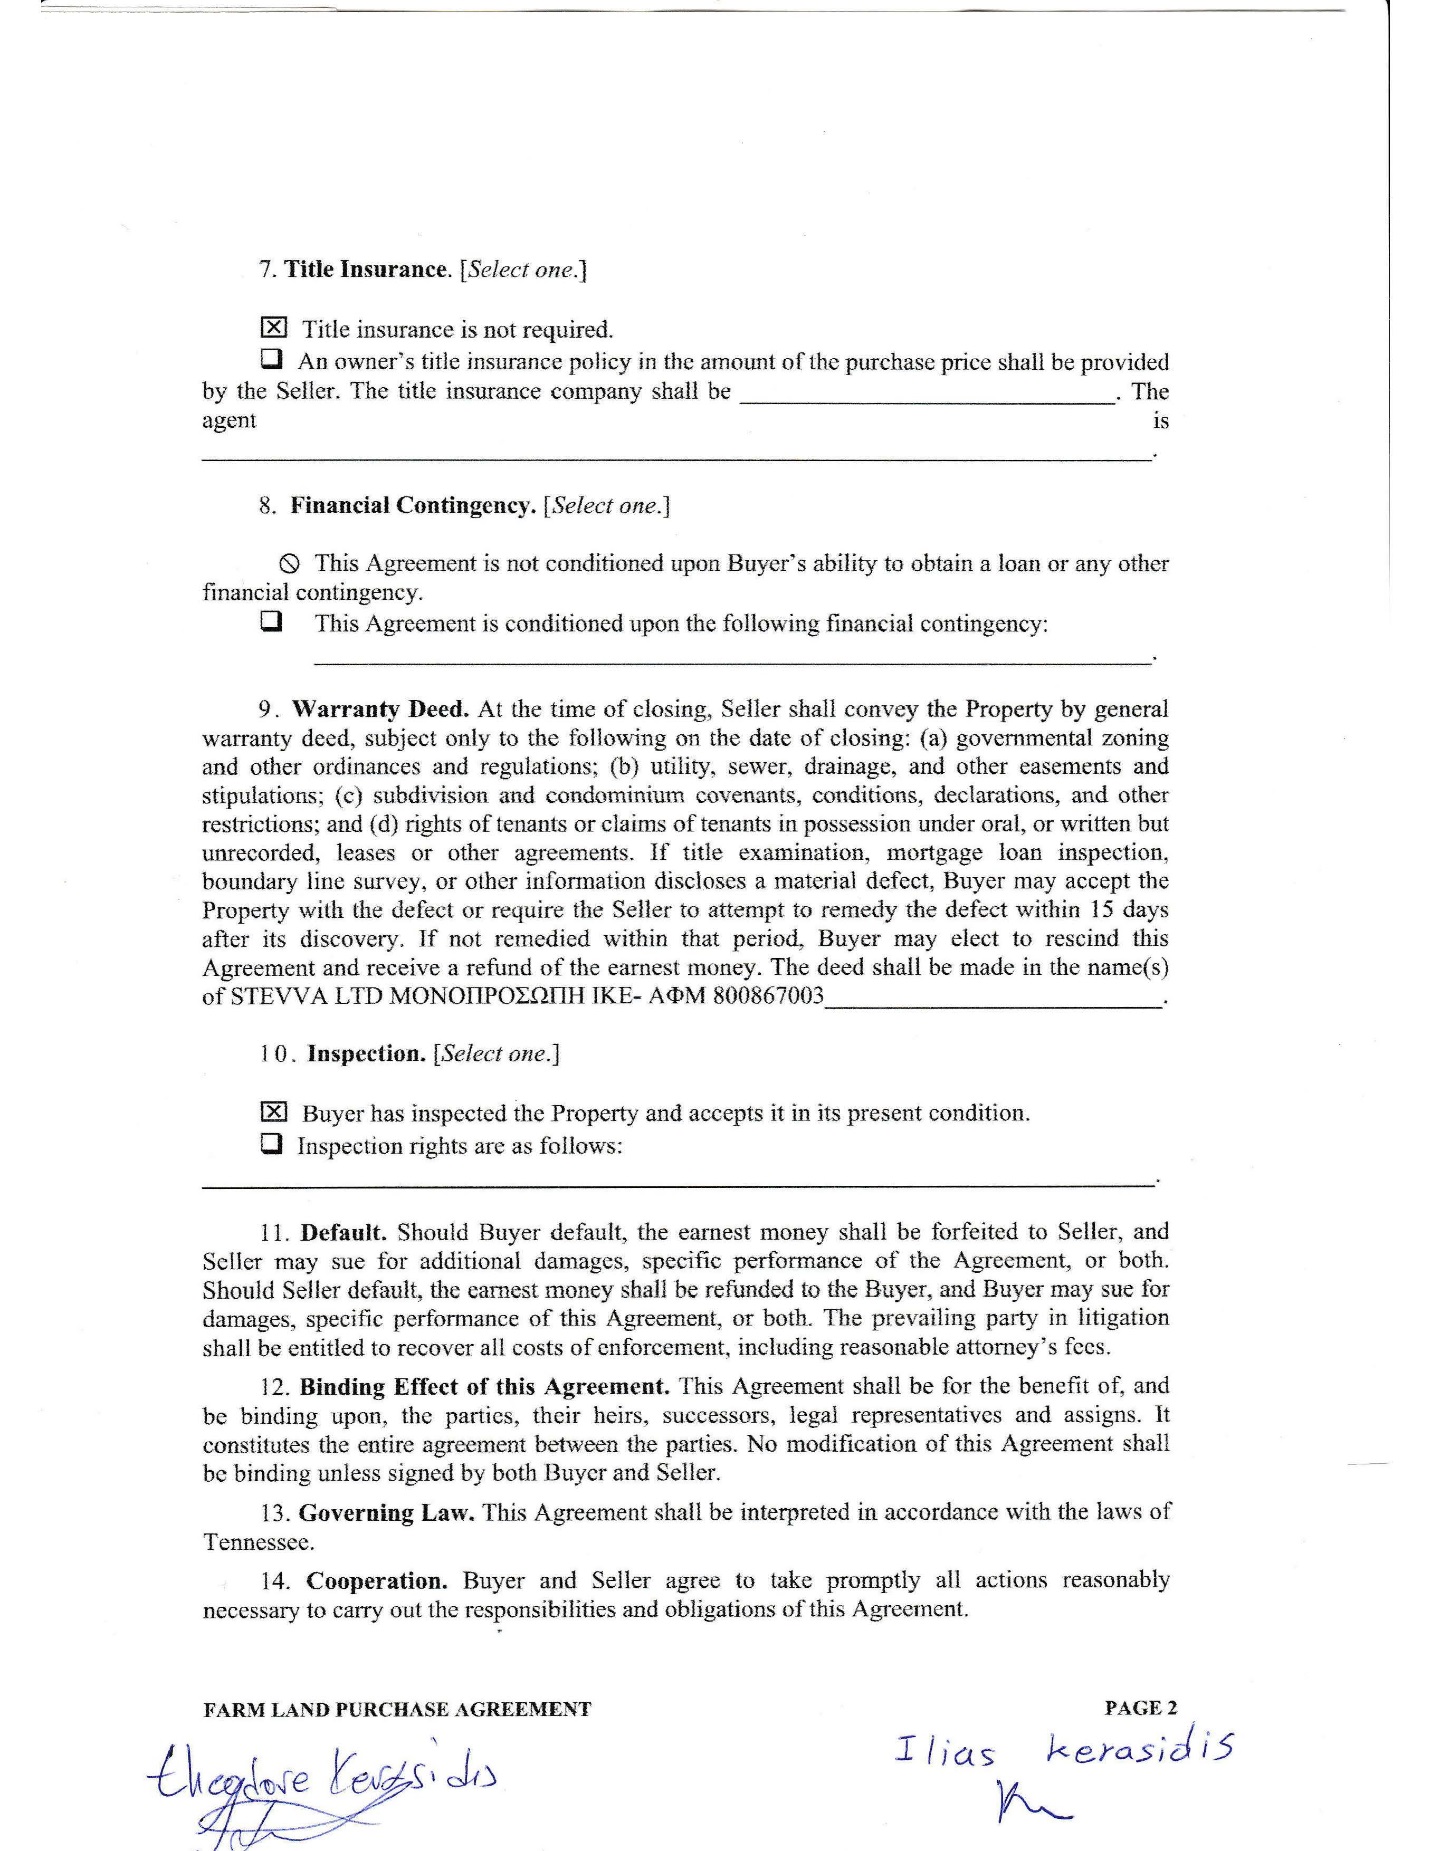 Ex 10.02 Farm Land Purchase Agreement_Page_2.jpg